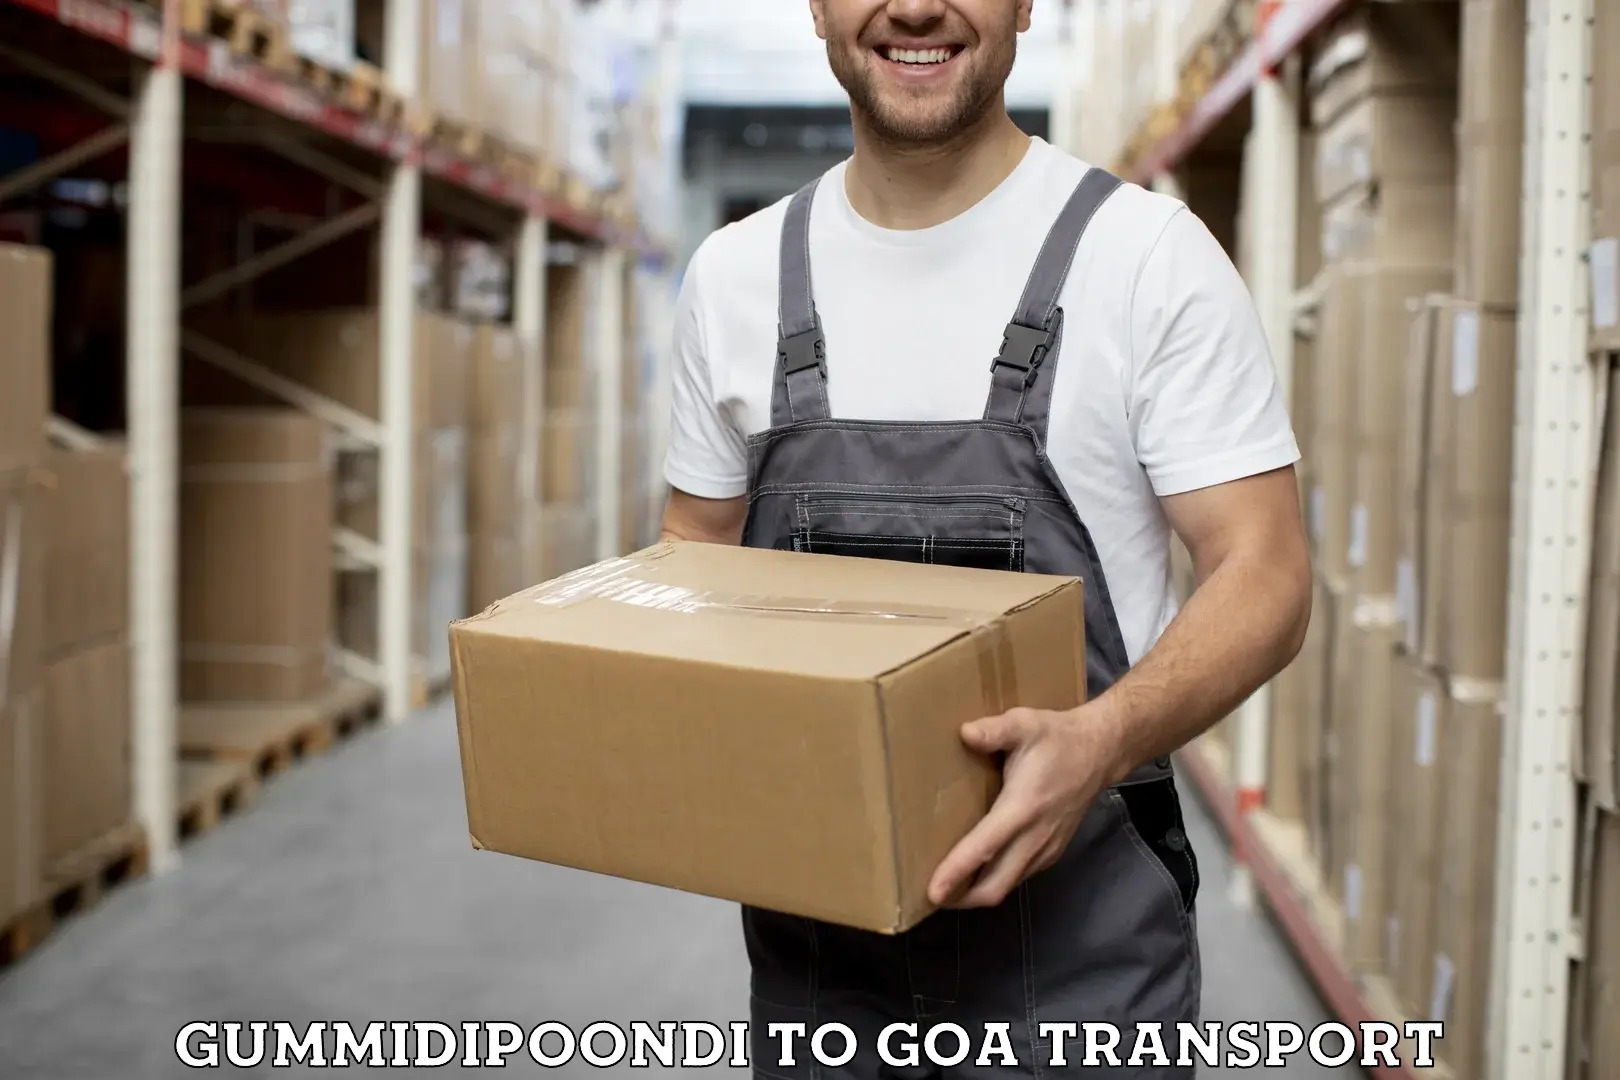 Transport bike from one state to another Gummidipoondi to Goa University